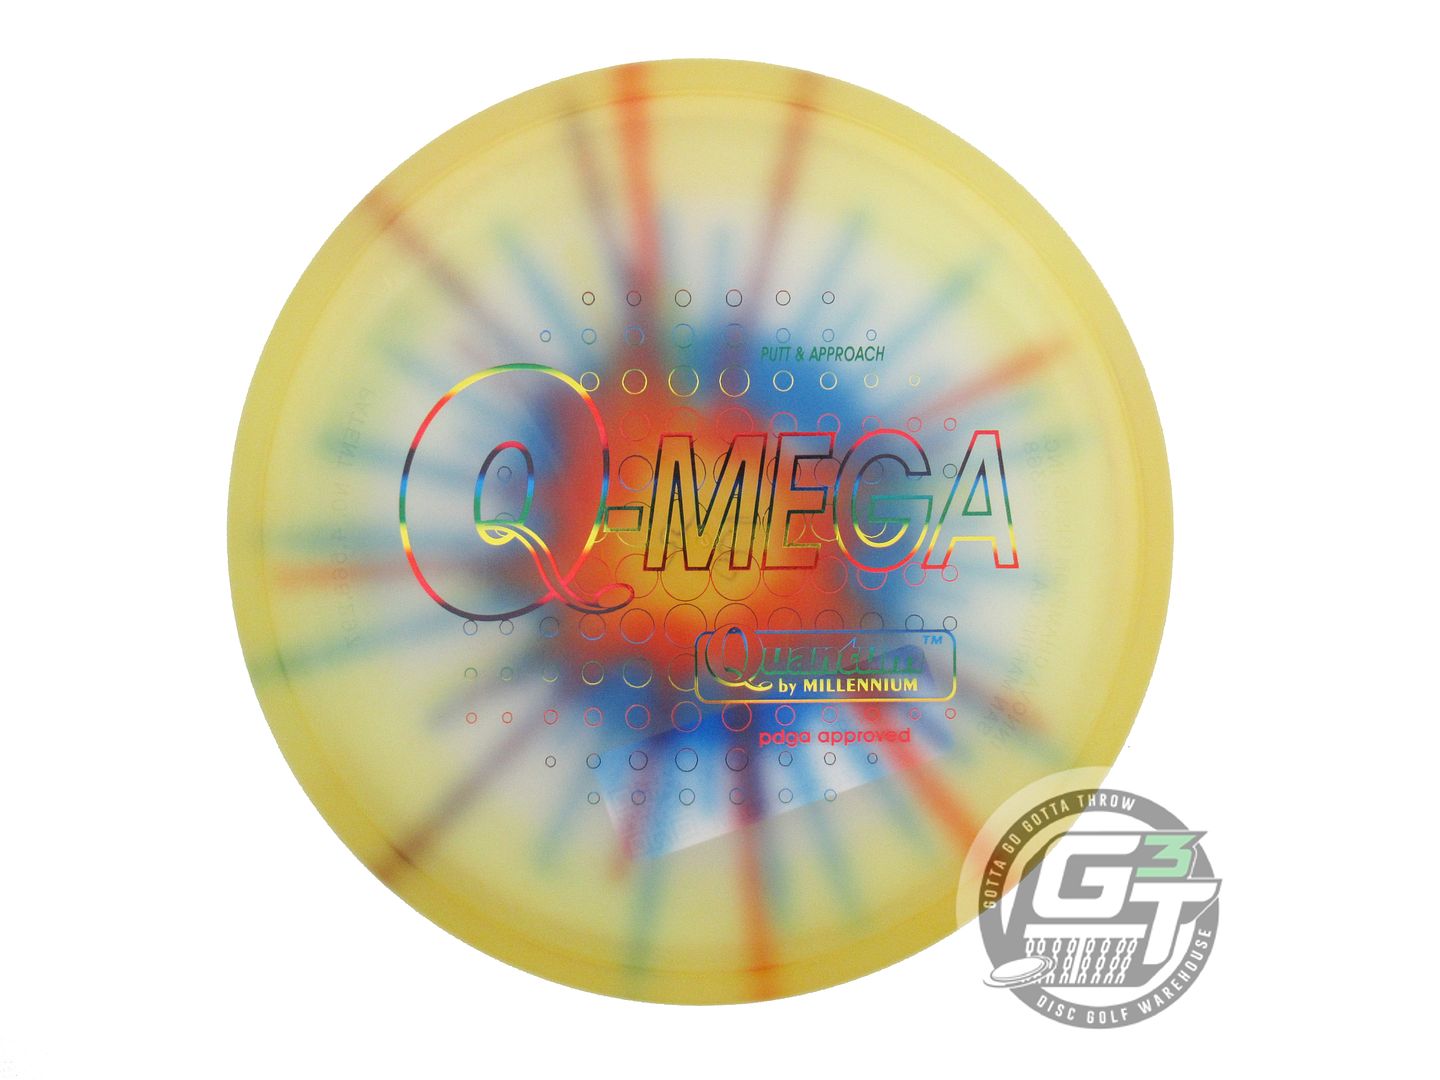 Millennium Tie-Dye Quantum Omega Putter Golf Disc (2-Ring San Marino) (Individually Listed)